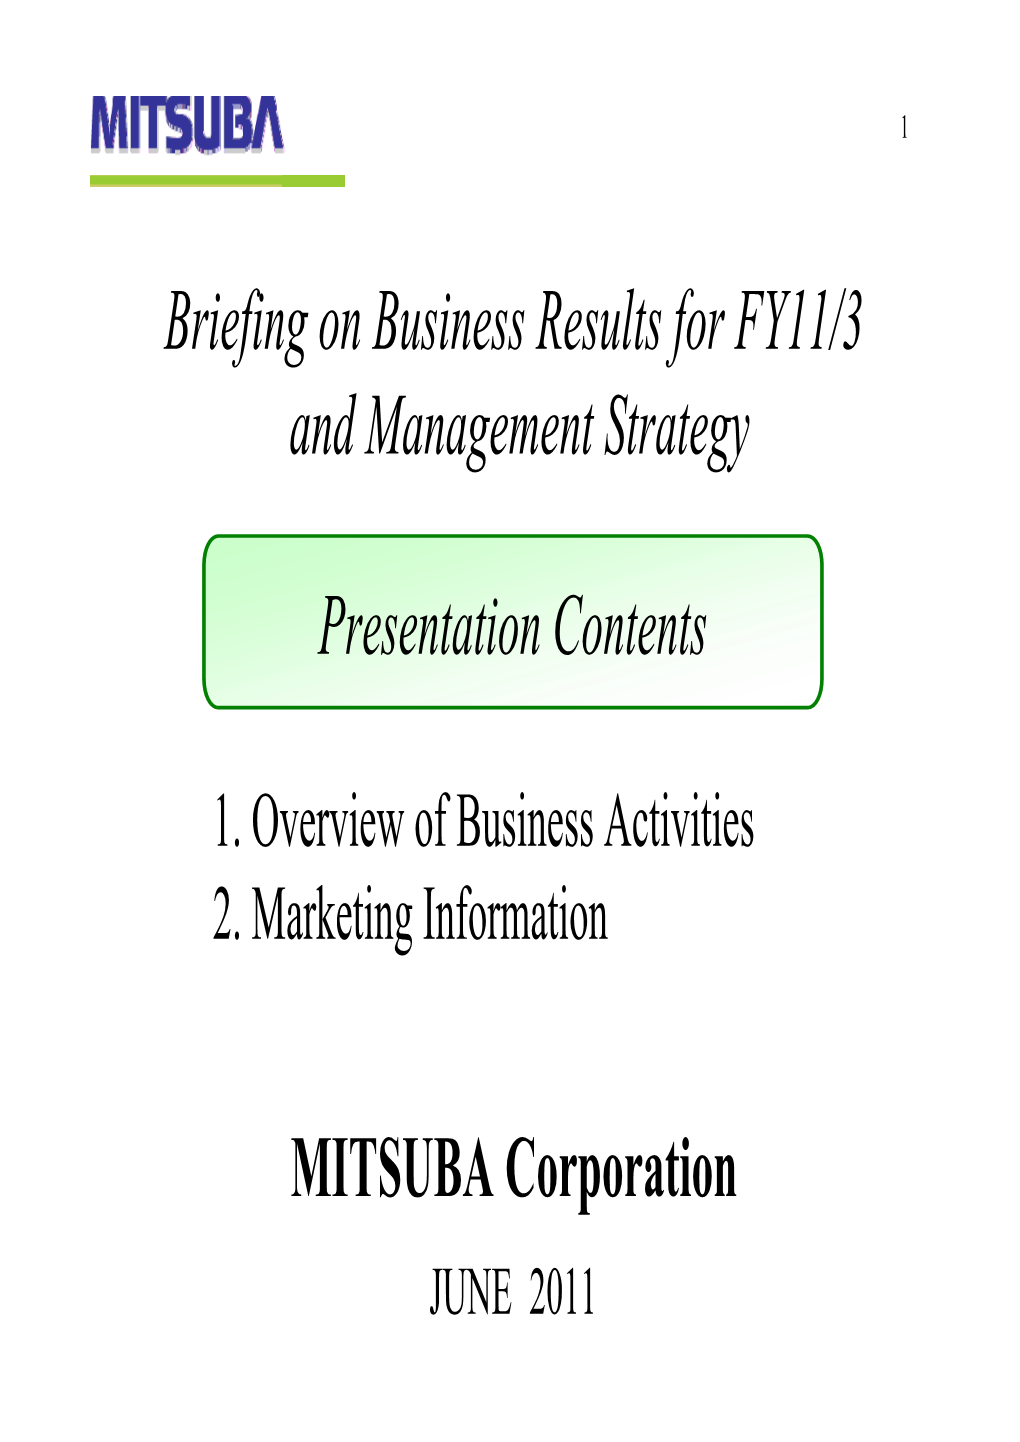 MITSUBA Corporation Briefing on Business Results for FY11/3 And